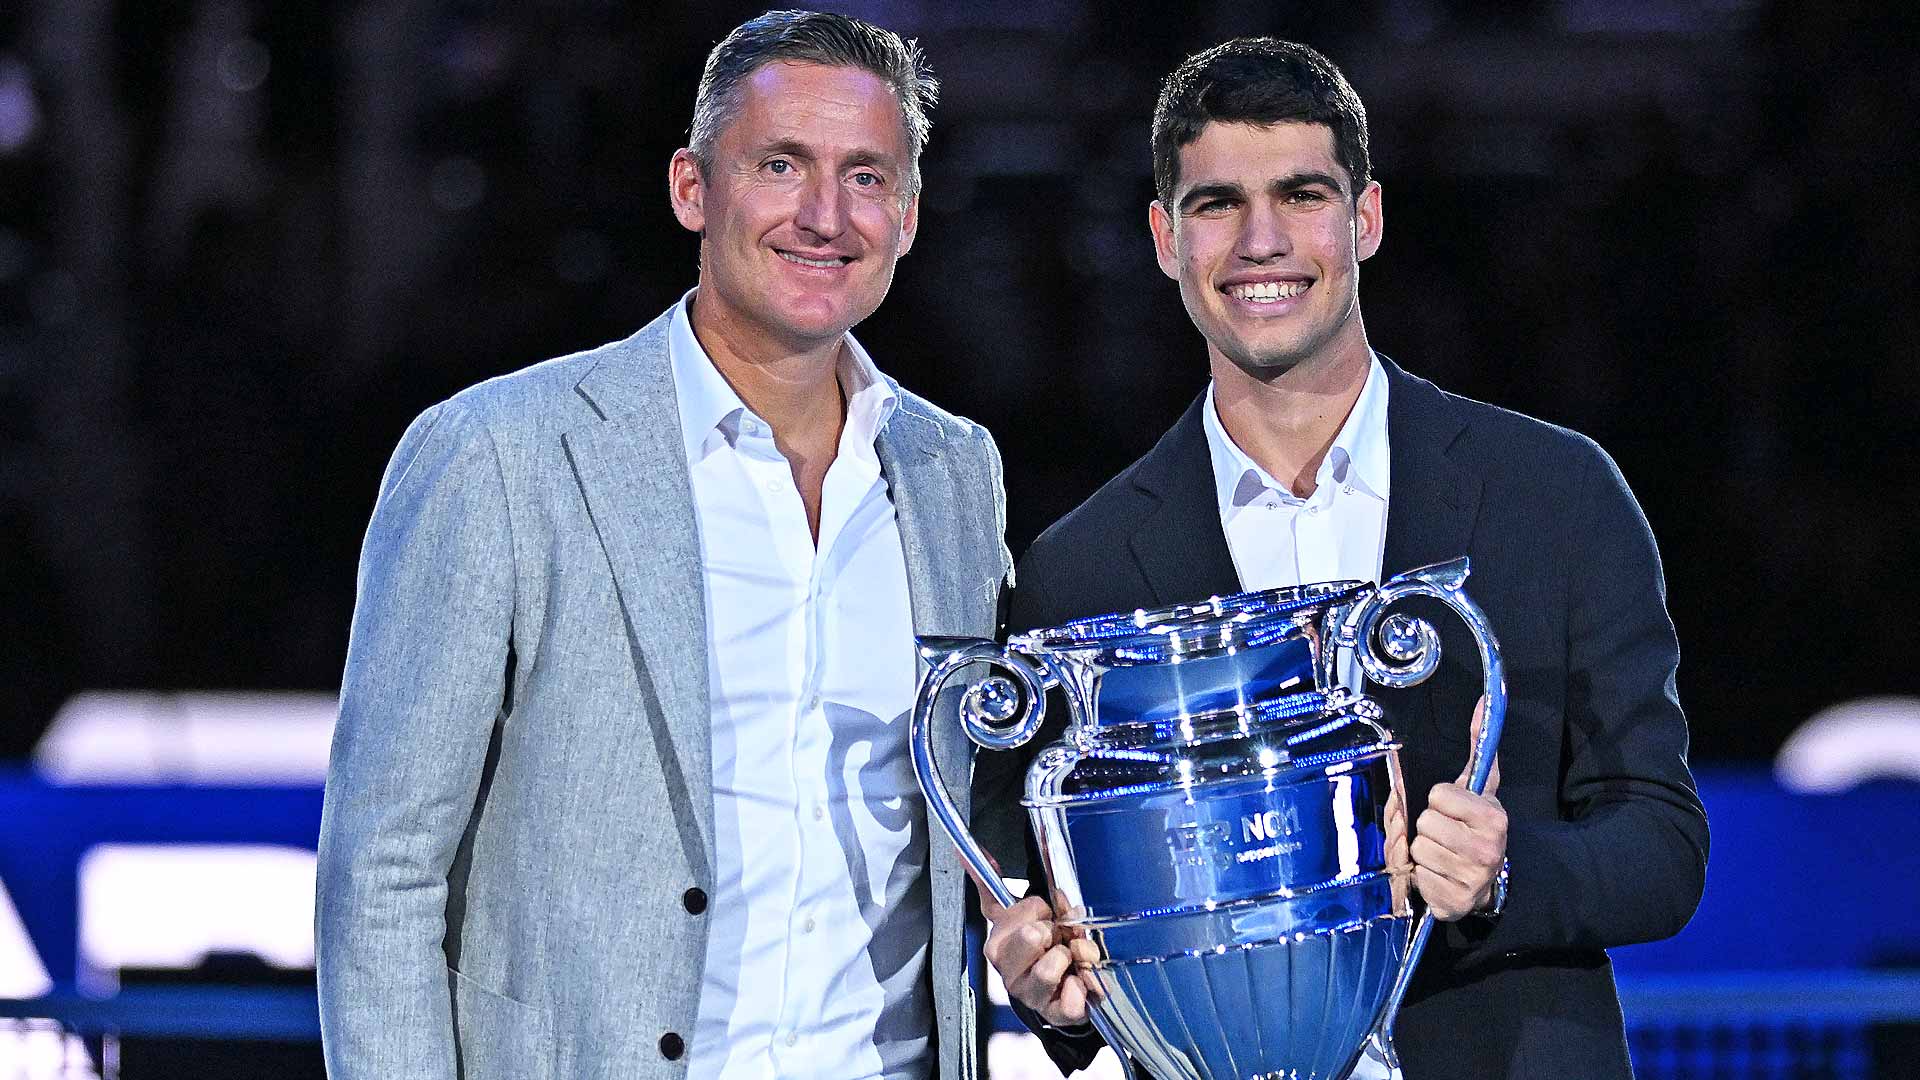 ATP Chairman Andrea Gaudenzi presents Carlos Alcaraz with the year-end ATP No. 1 Trophy presented by Pepperstone on Wednesday in Turin.